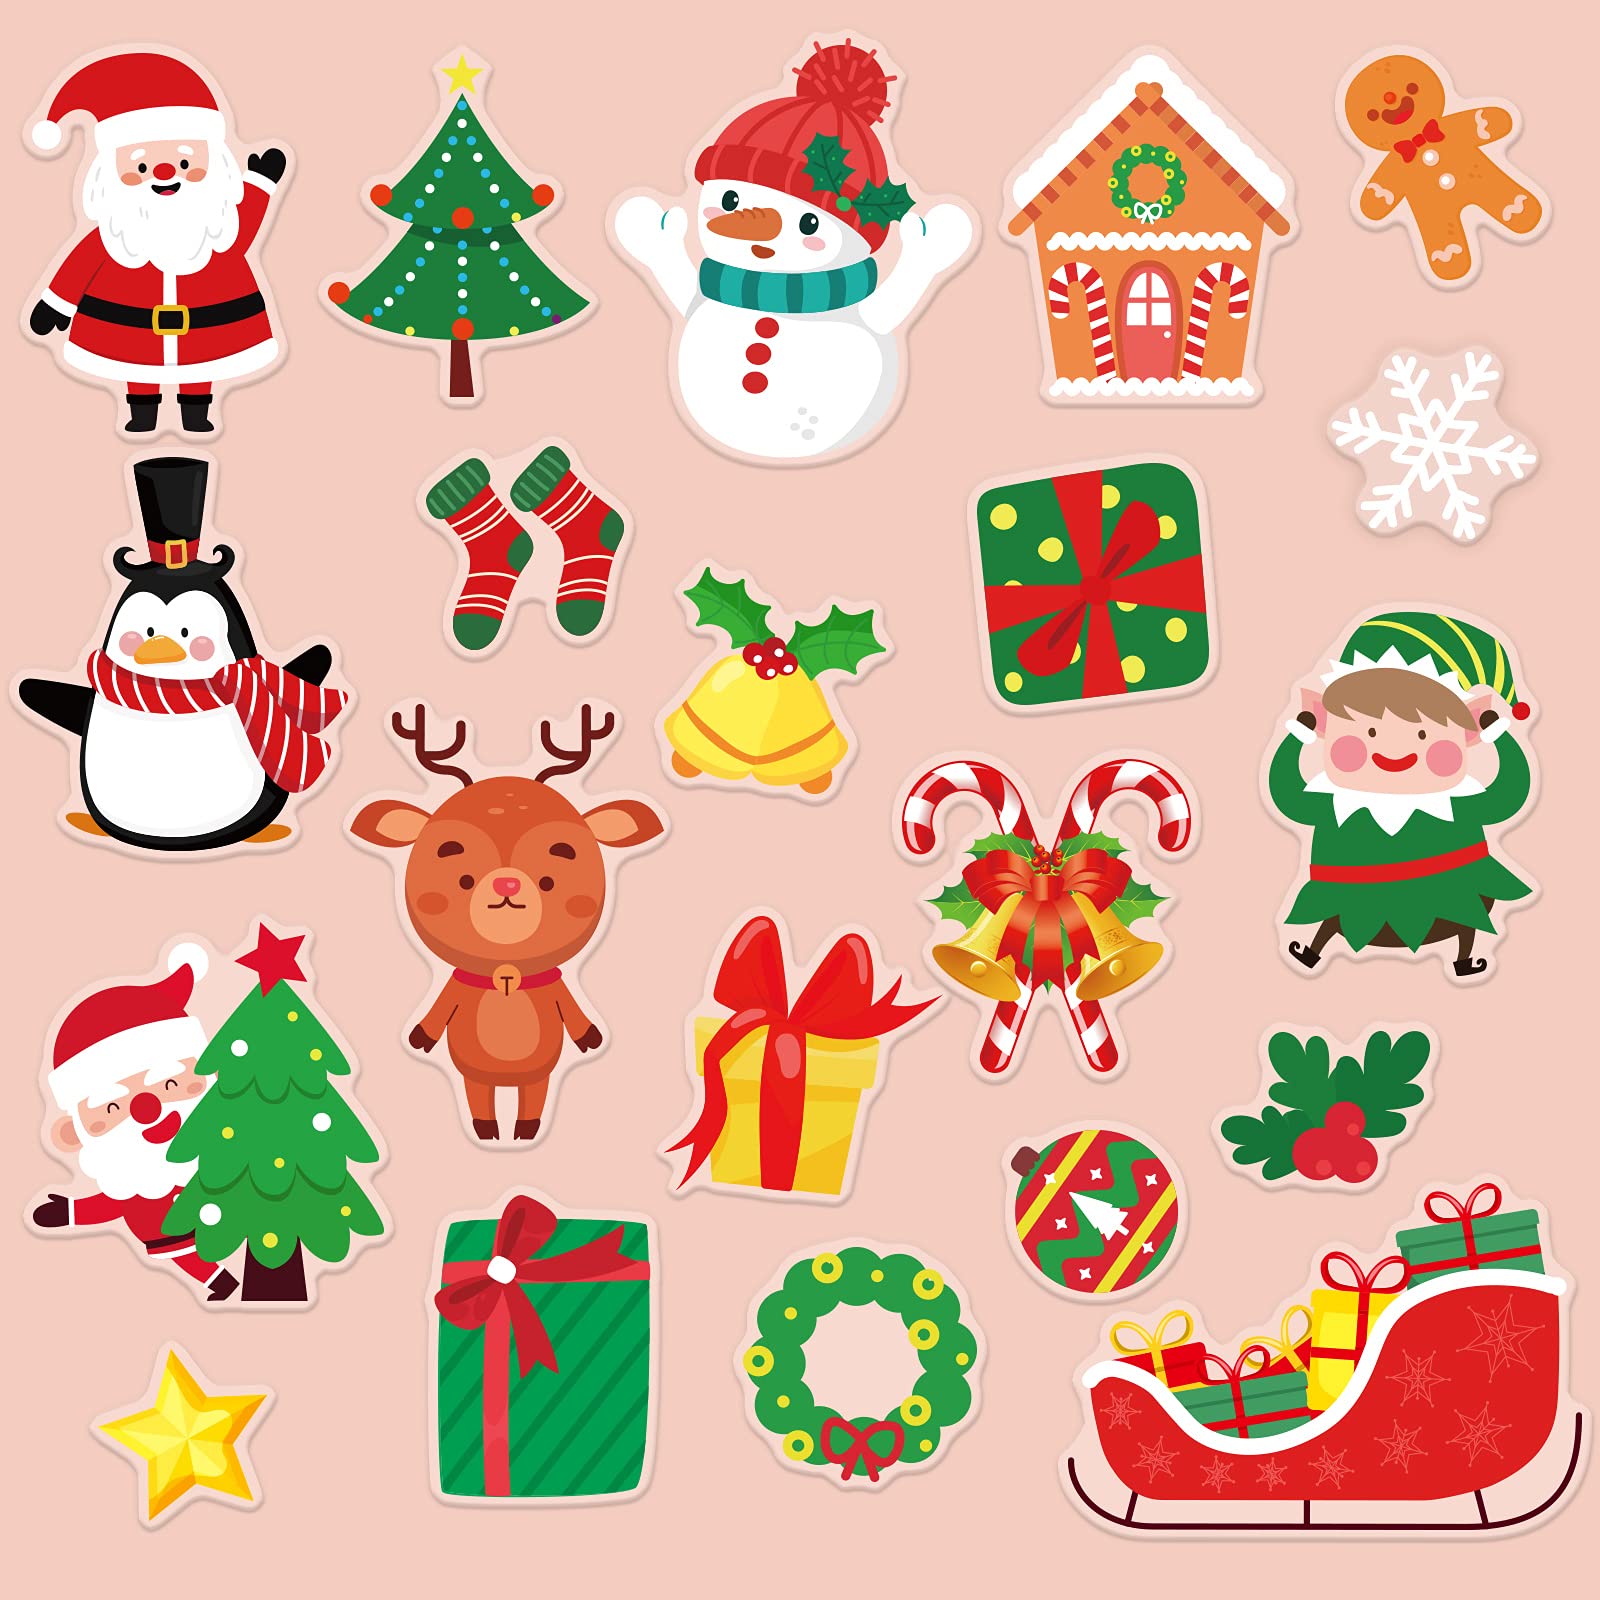 Tevxj 40 PCS Christmas Thick Gel Clings Winter Christmas Window Gel Clings Decals Stickers for Kids Toddlers and Adults Home Airplane 